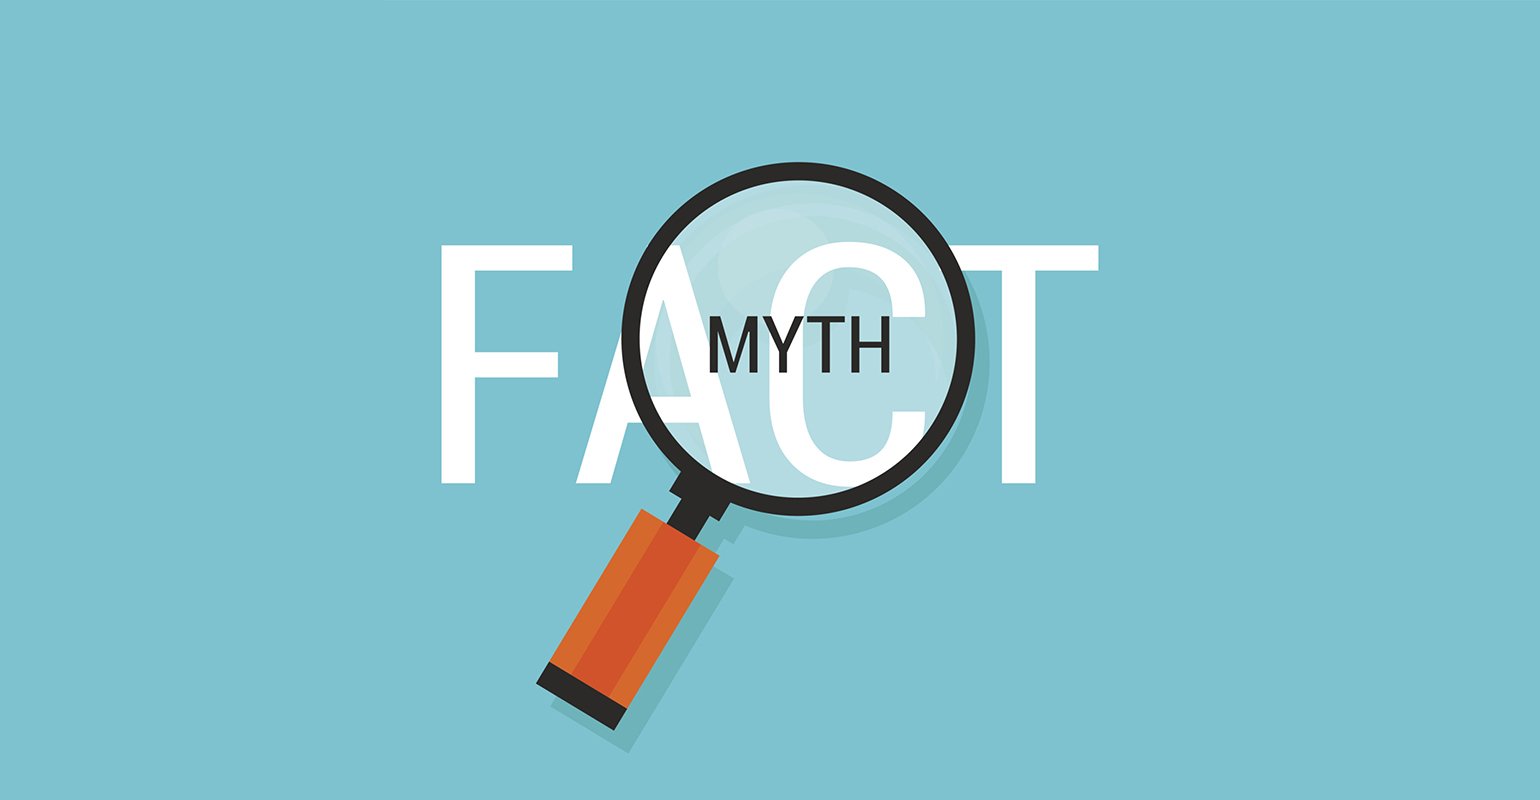 People have myths not just about mental health but also mental health practitioners